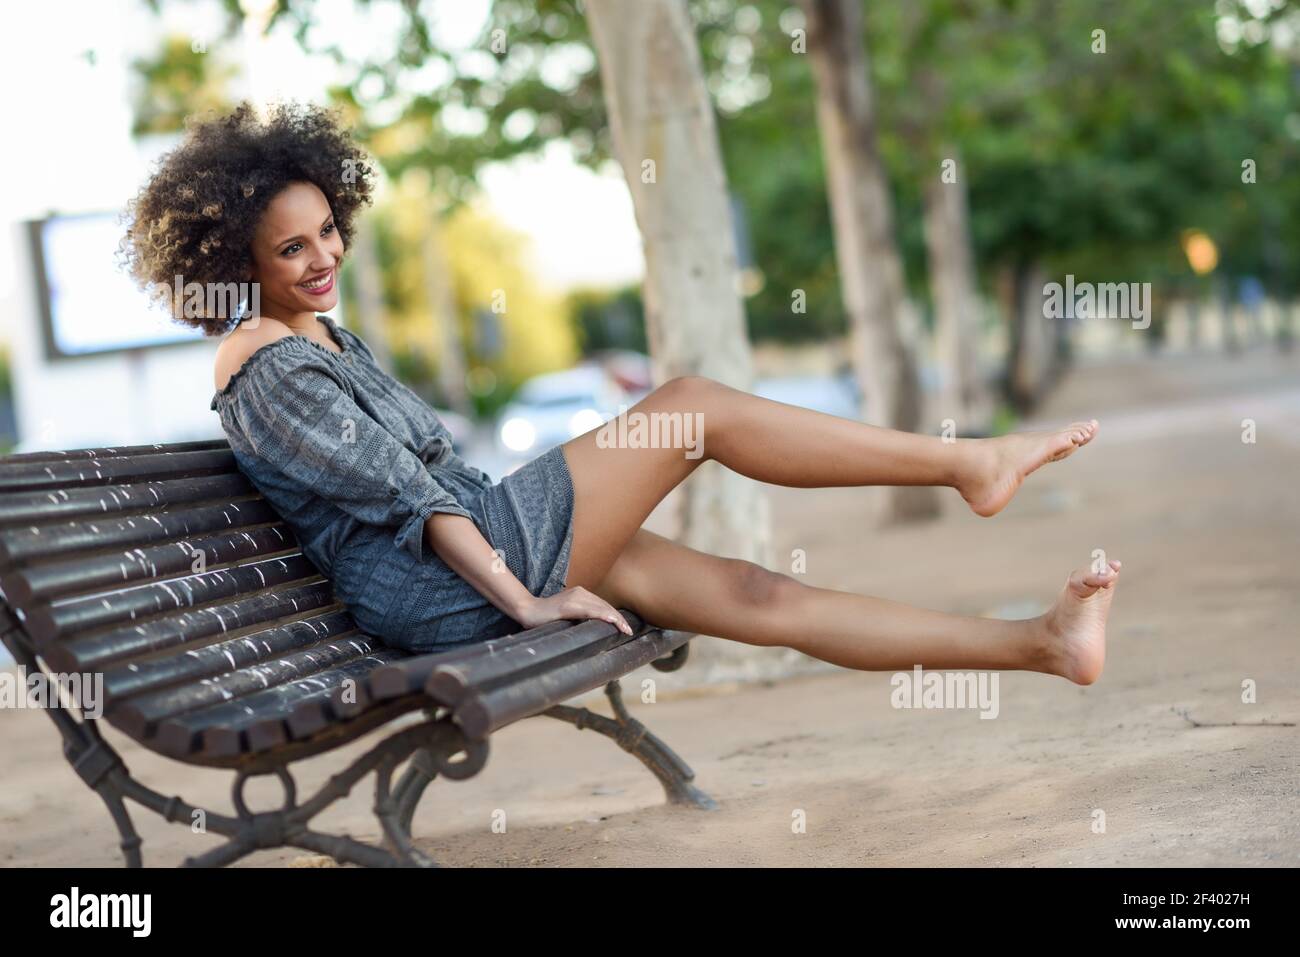 Young black woman with afro hairstyle smiling in urban backgroun. Young black woman with afro hairstyle sitting on a bench in urban background moving her legs. Mixed girl wearing casual clothes. Stock Photo